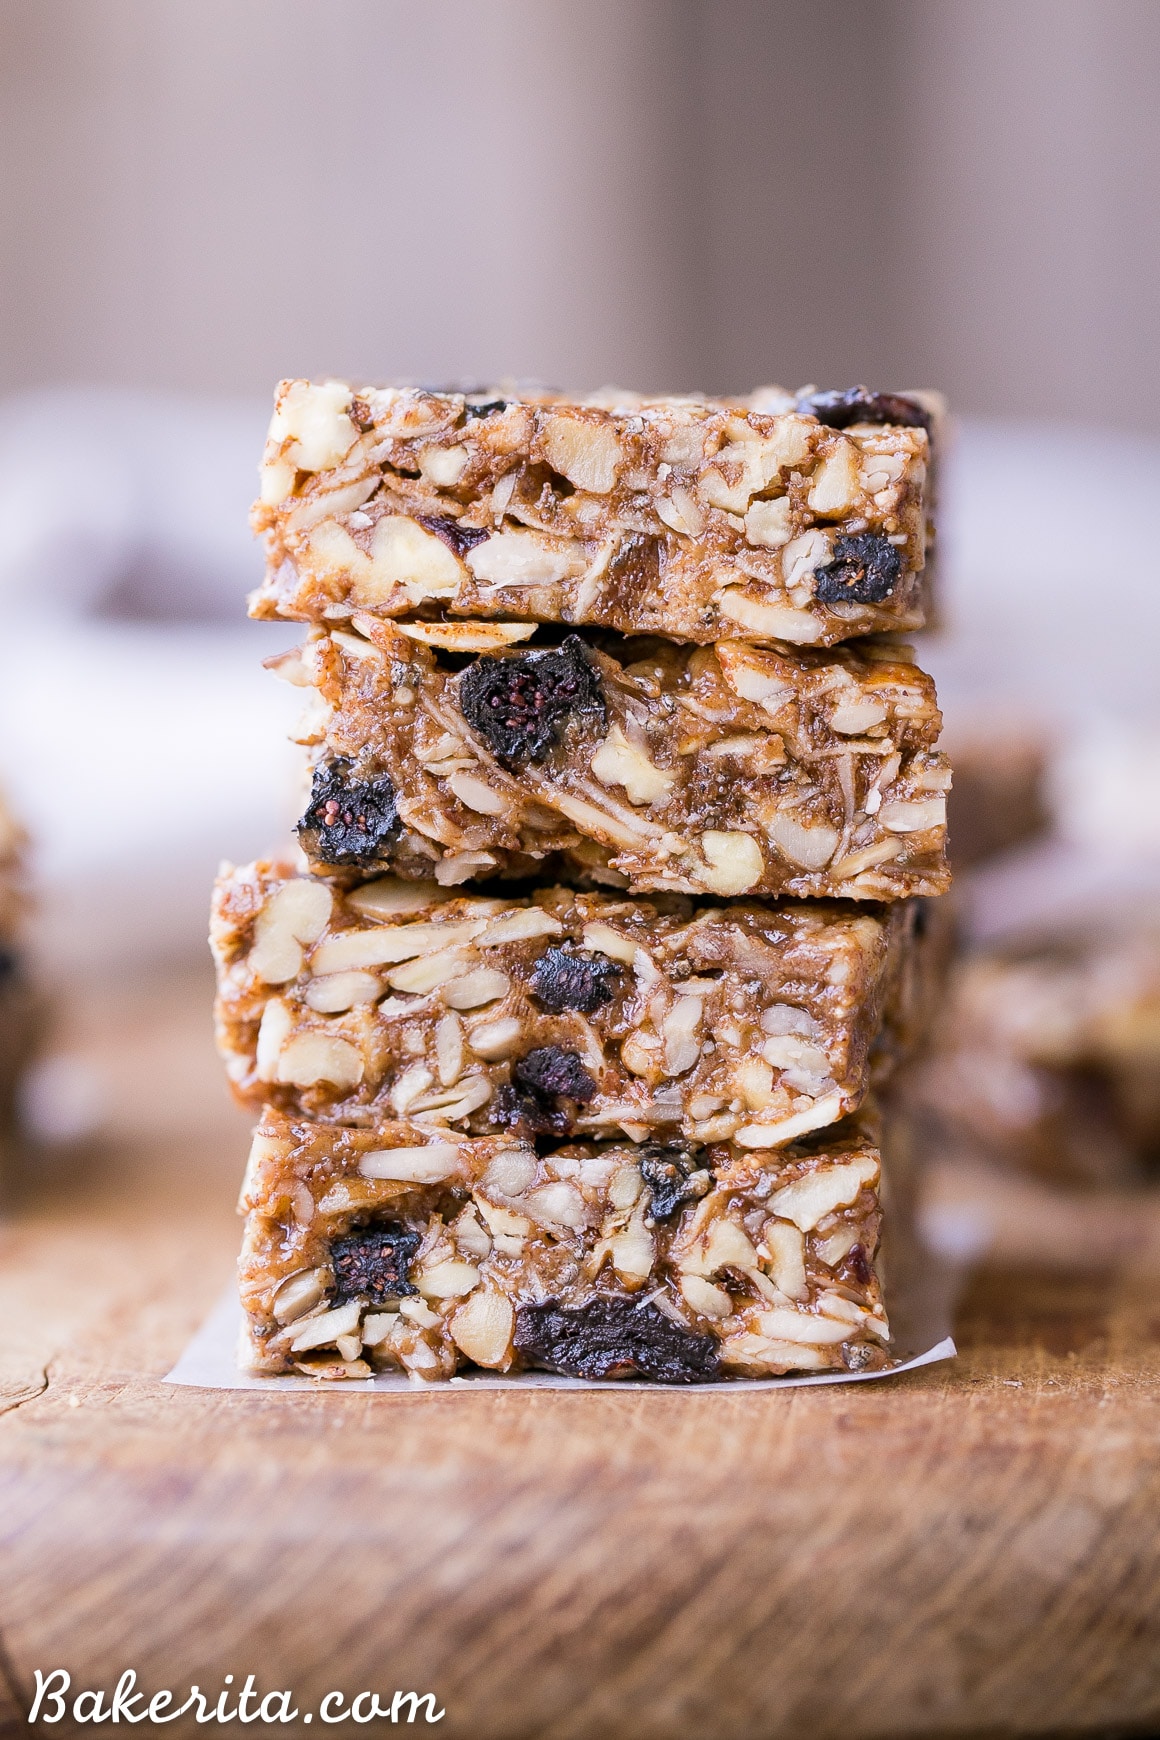 These No-Bake Trail Mix Granola Bars are loaded with nuts, coconut, and dried fruit for a filling and delicious snack that will fill you up and satisfy your tastebuds! These Paleo + vegan granola bars are the perfect thing to keep on hand for when hunger hits.